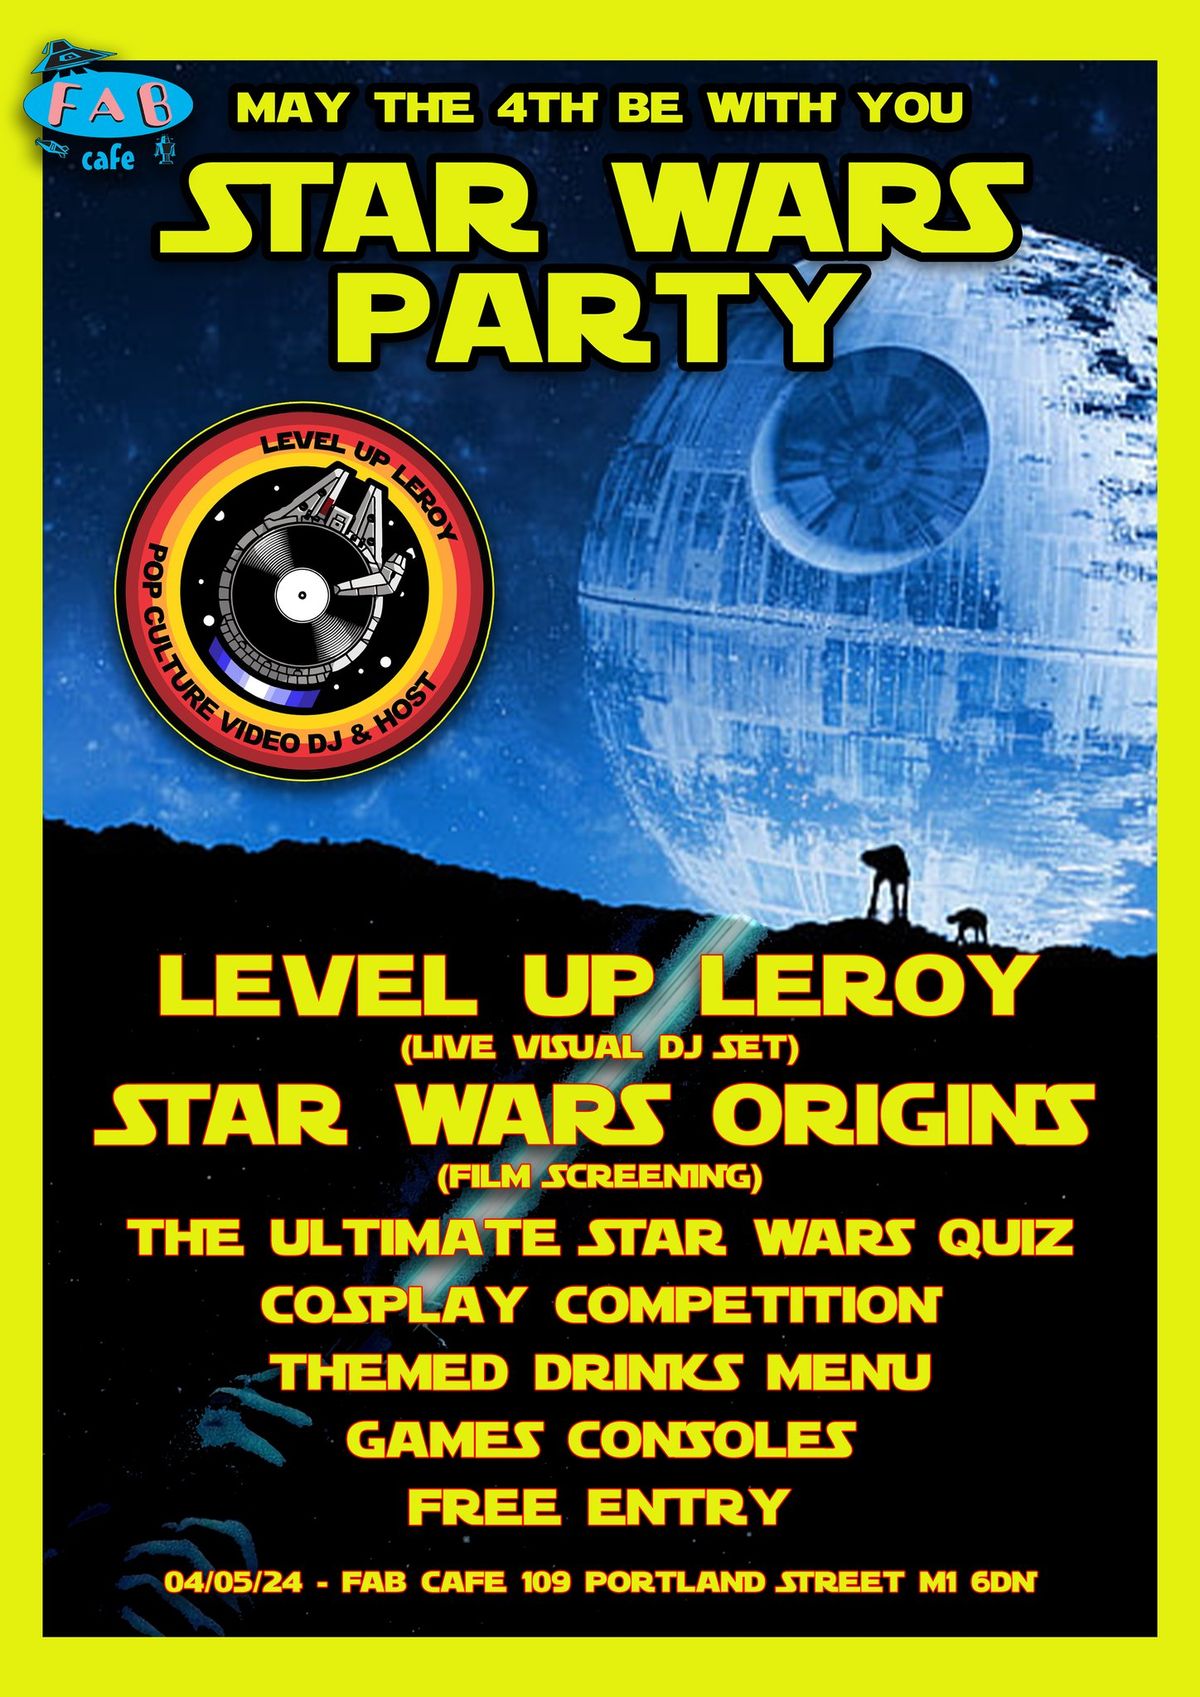 STAR WARS PARTY! (May The 4th Be With You)